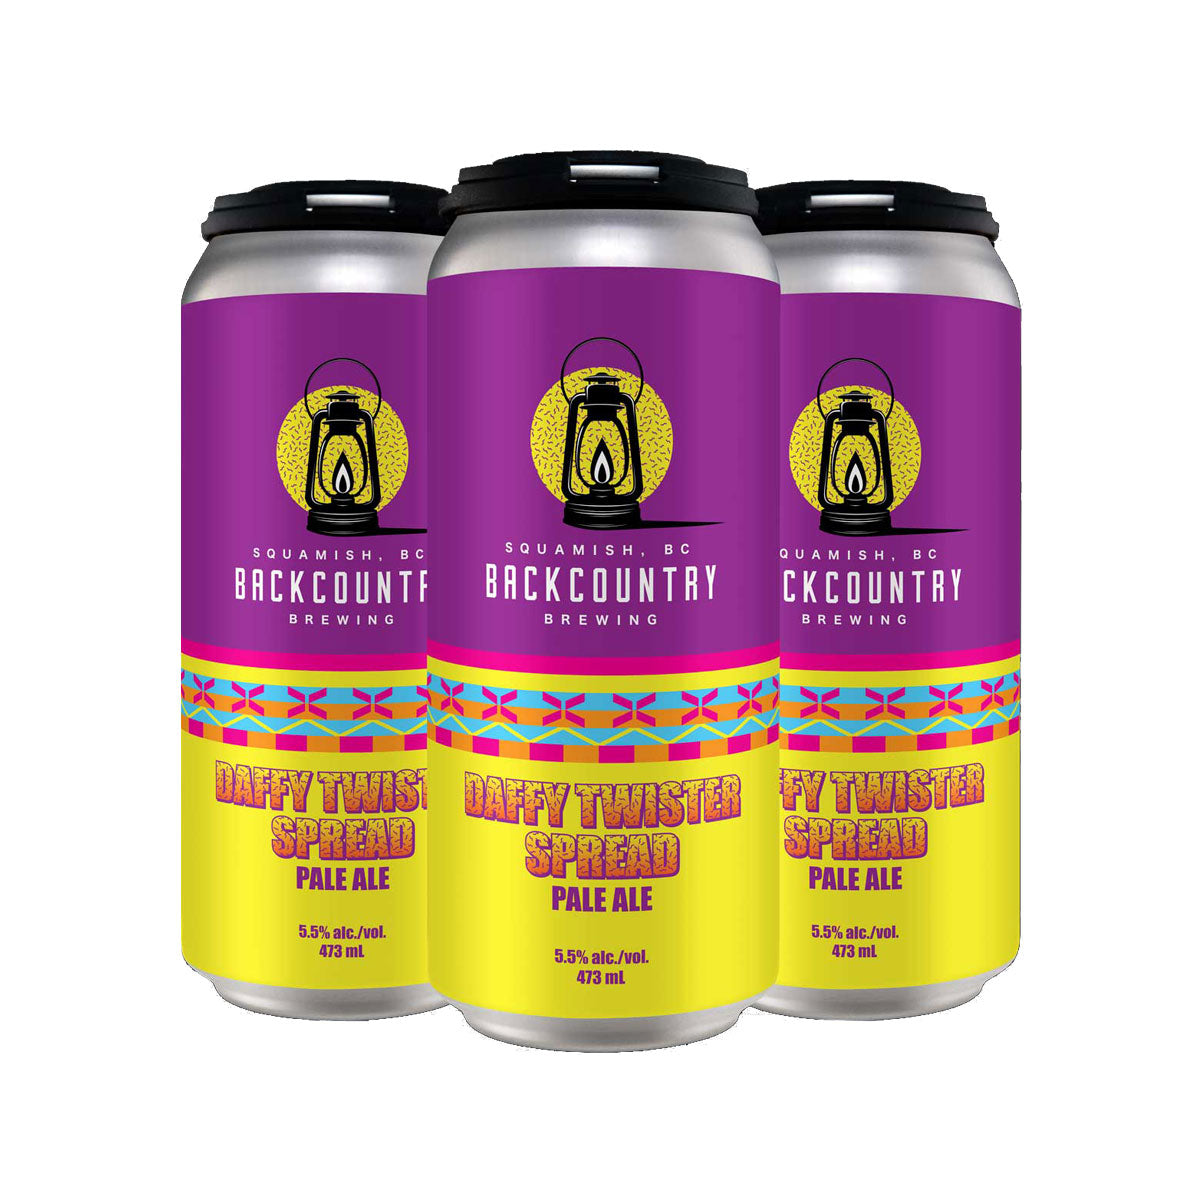 TAG Liquor Stores BC - Backcountry Brewing "Daffy Twister Spread" Pale Ale 4 Pack Cans